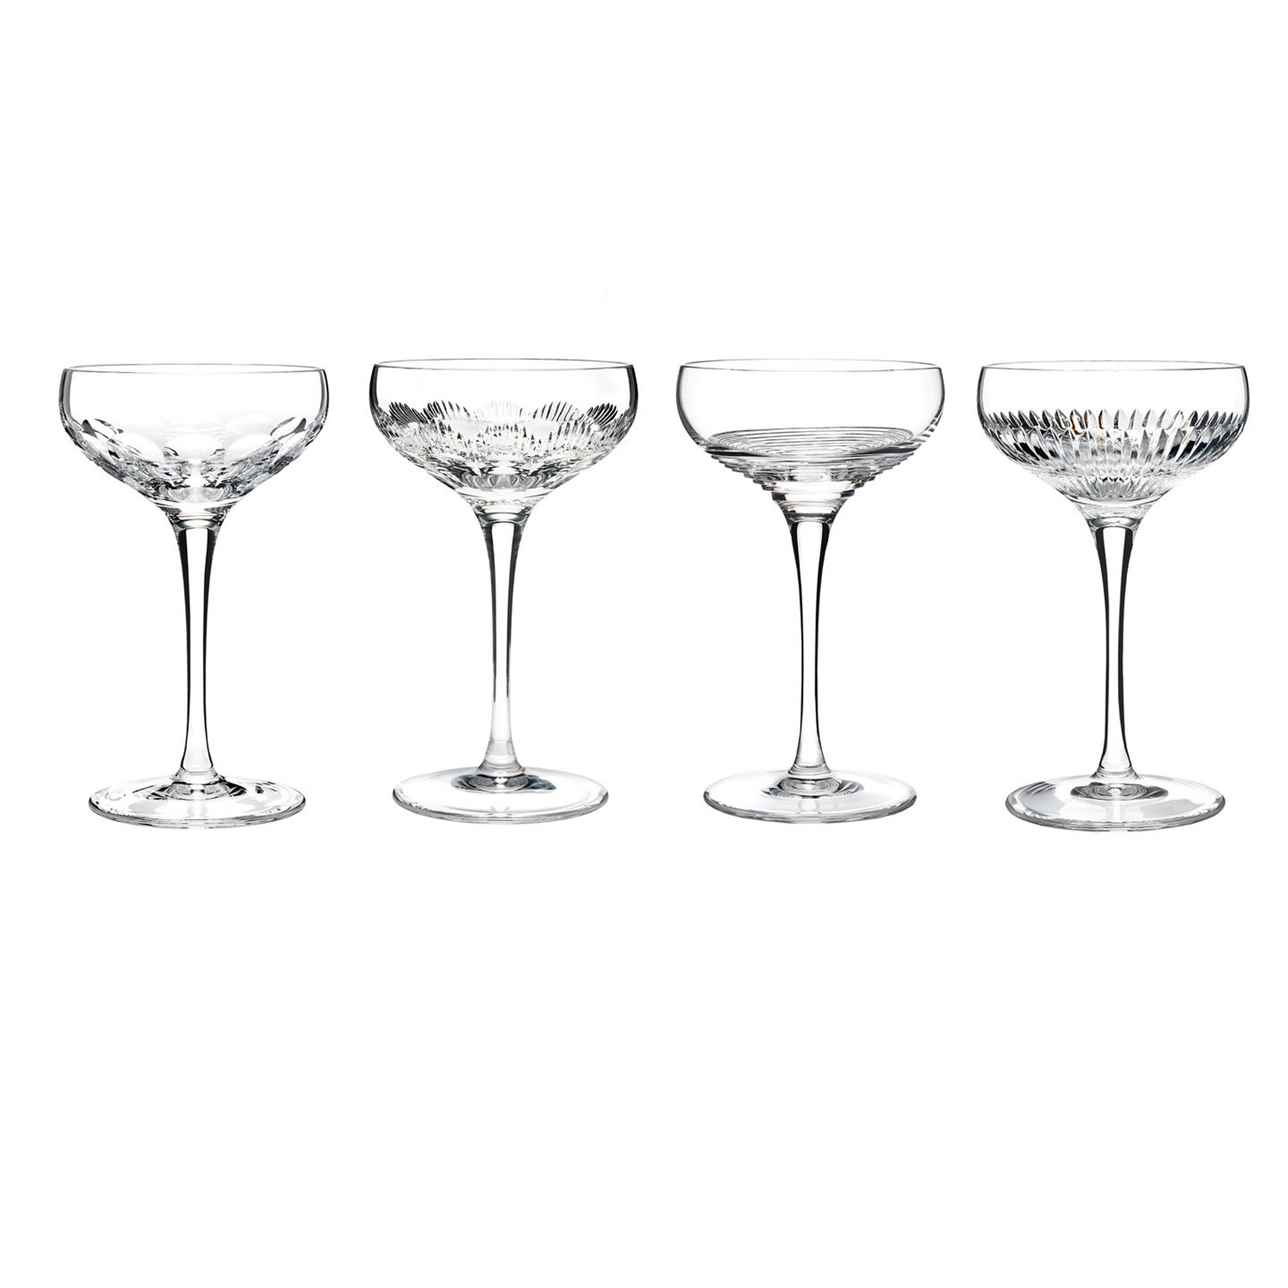  Mixology Champagne Coupe Clear, Set of 4 